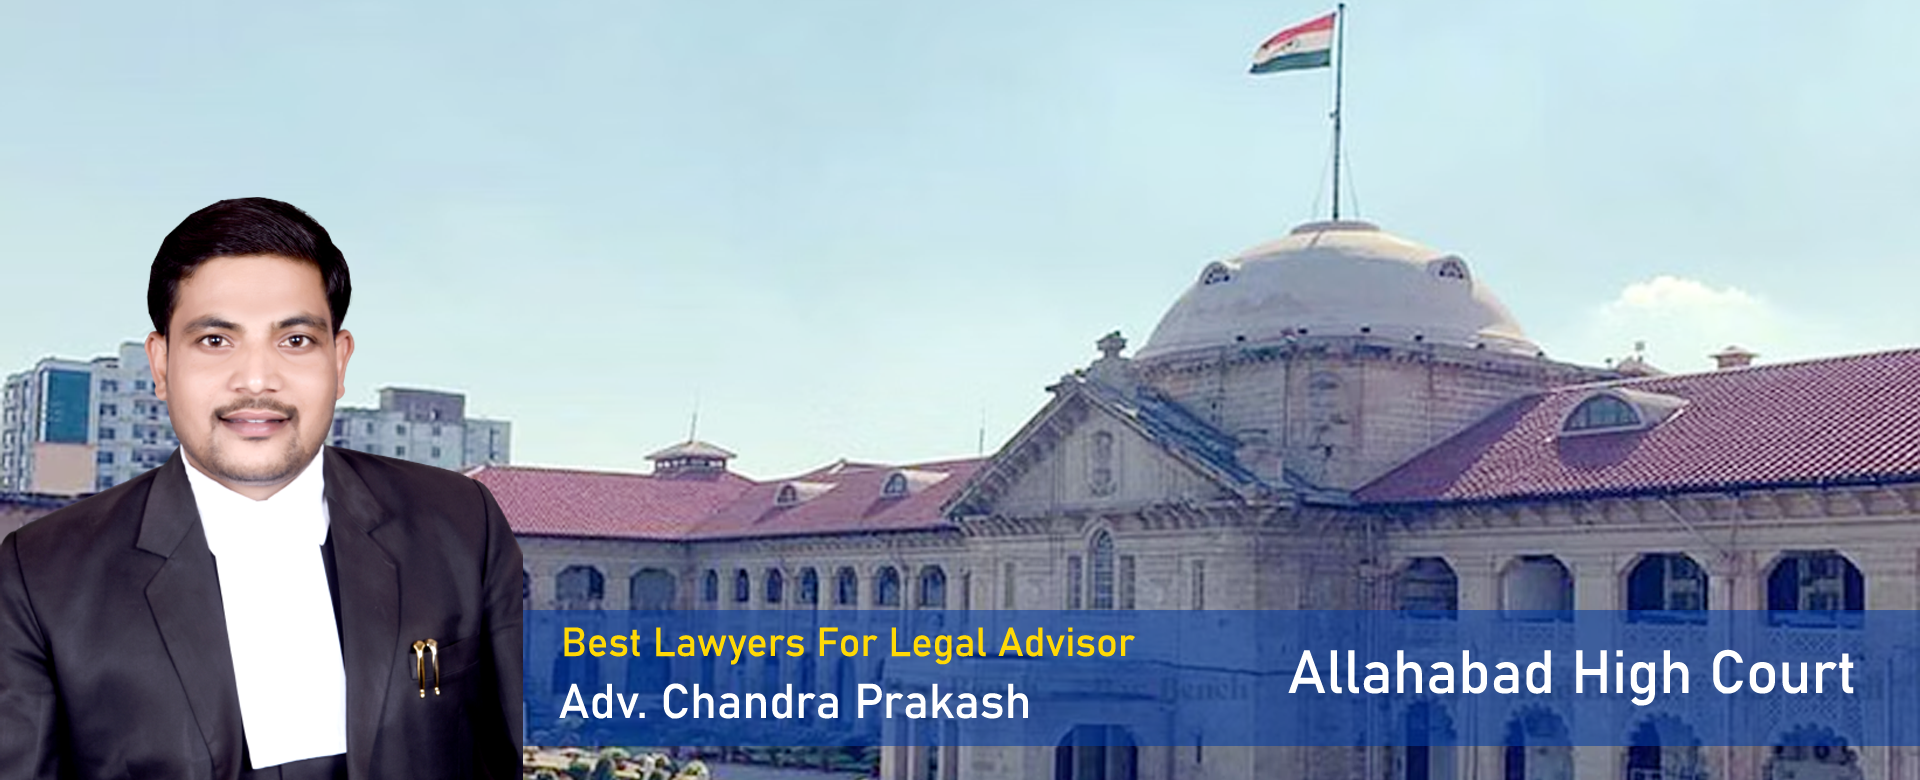 Best Lawyers For Legal Advisor in Allahabad